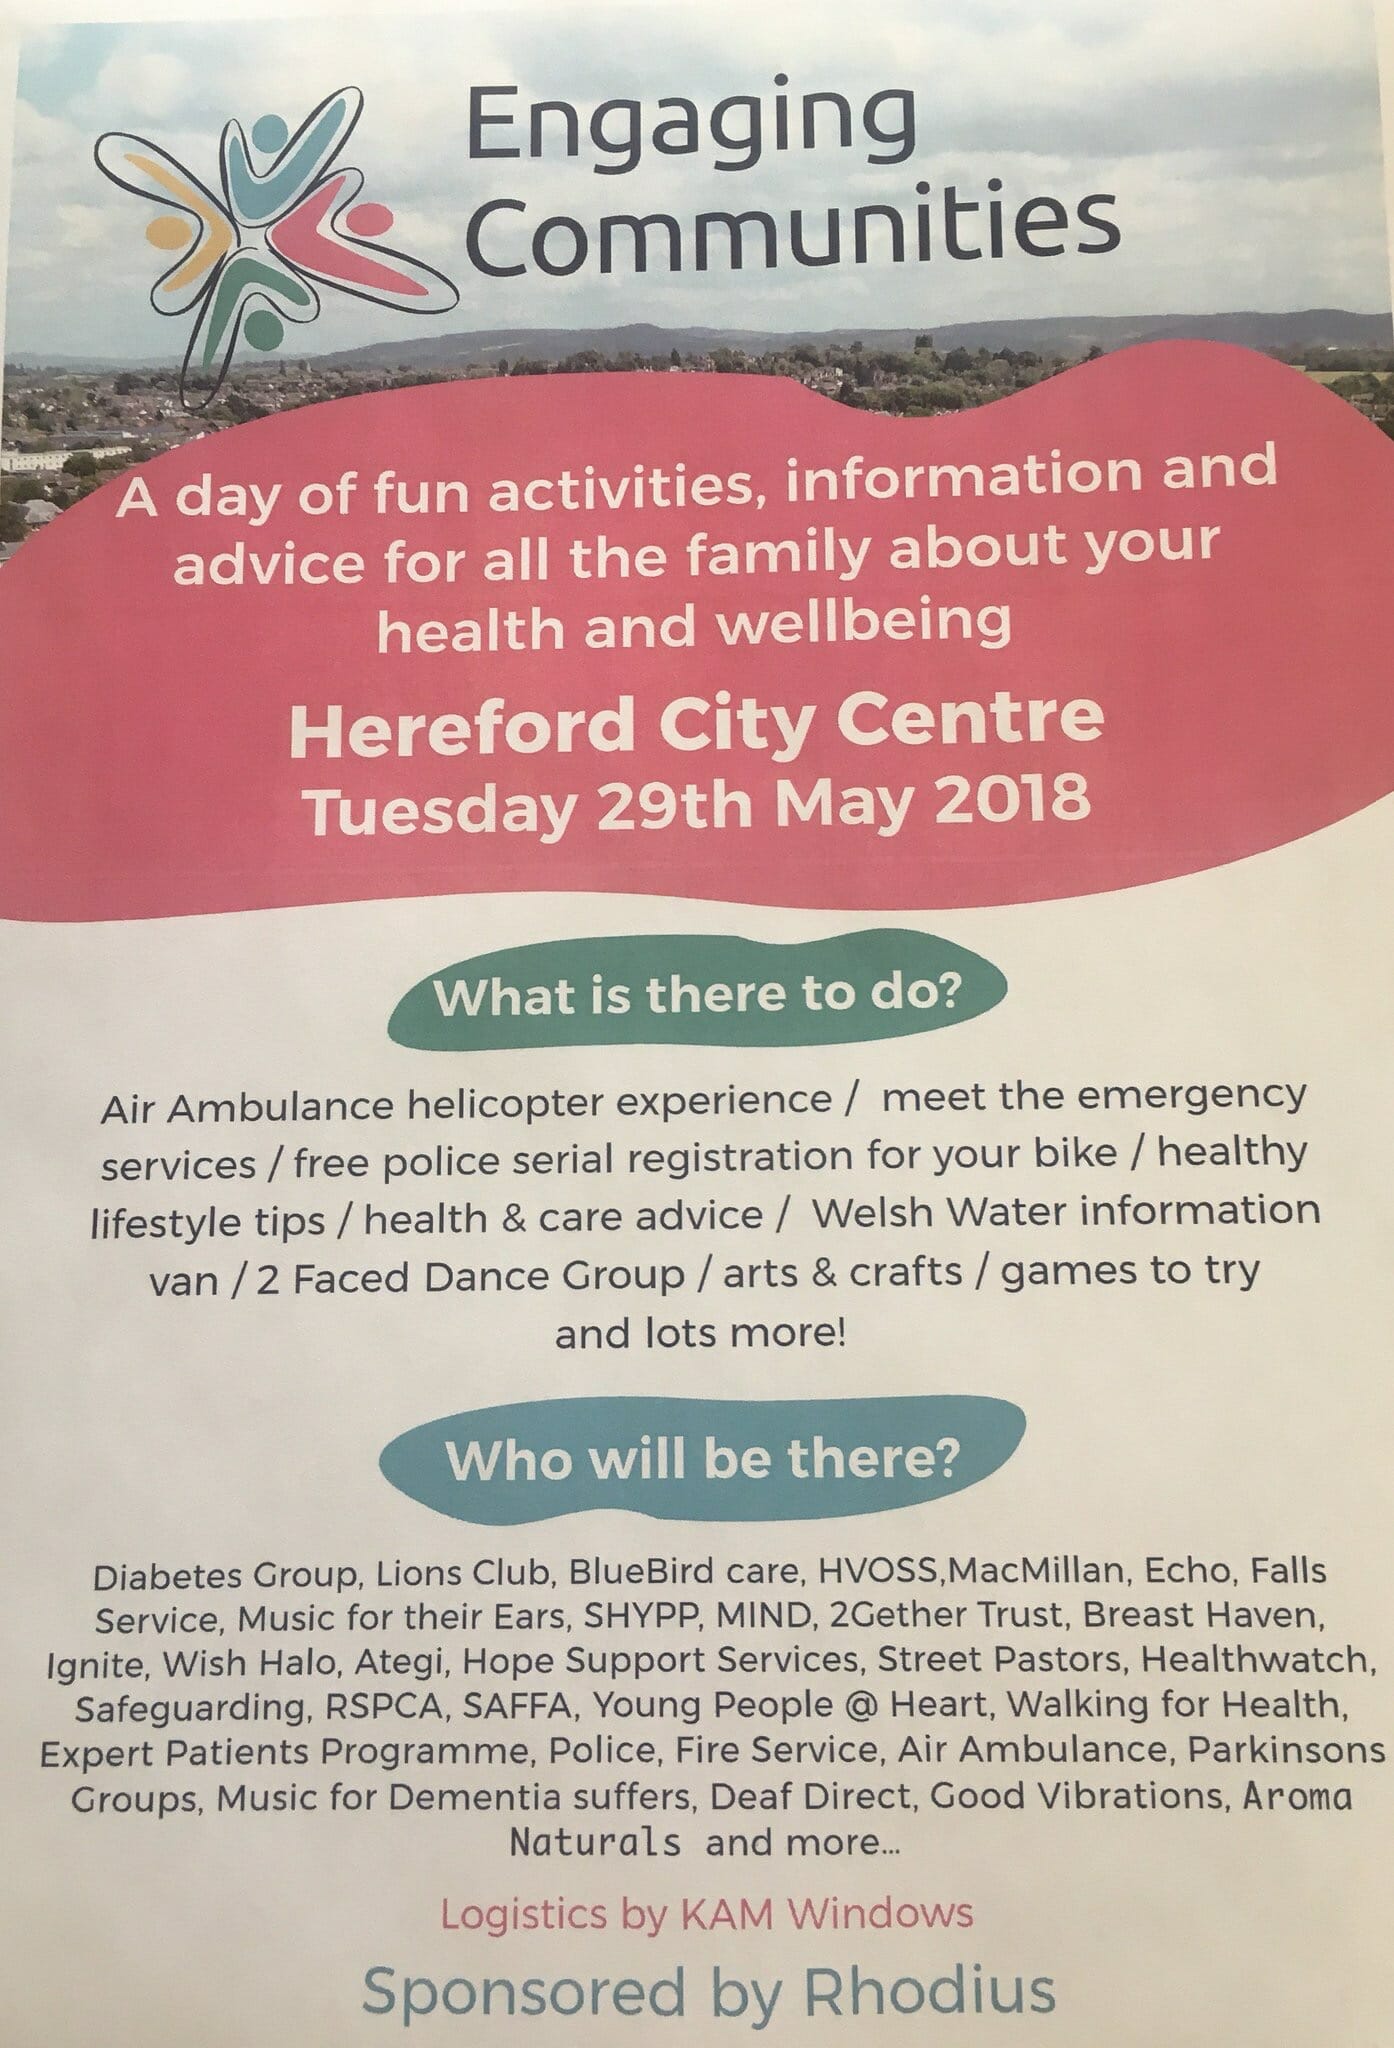 Engaging Communities Event in Hereford tomorrow